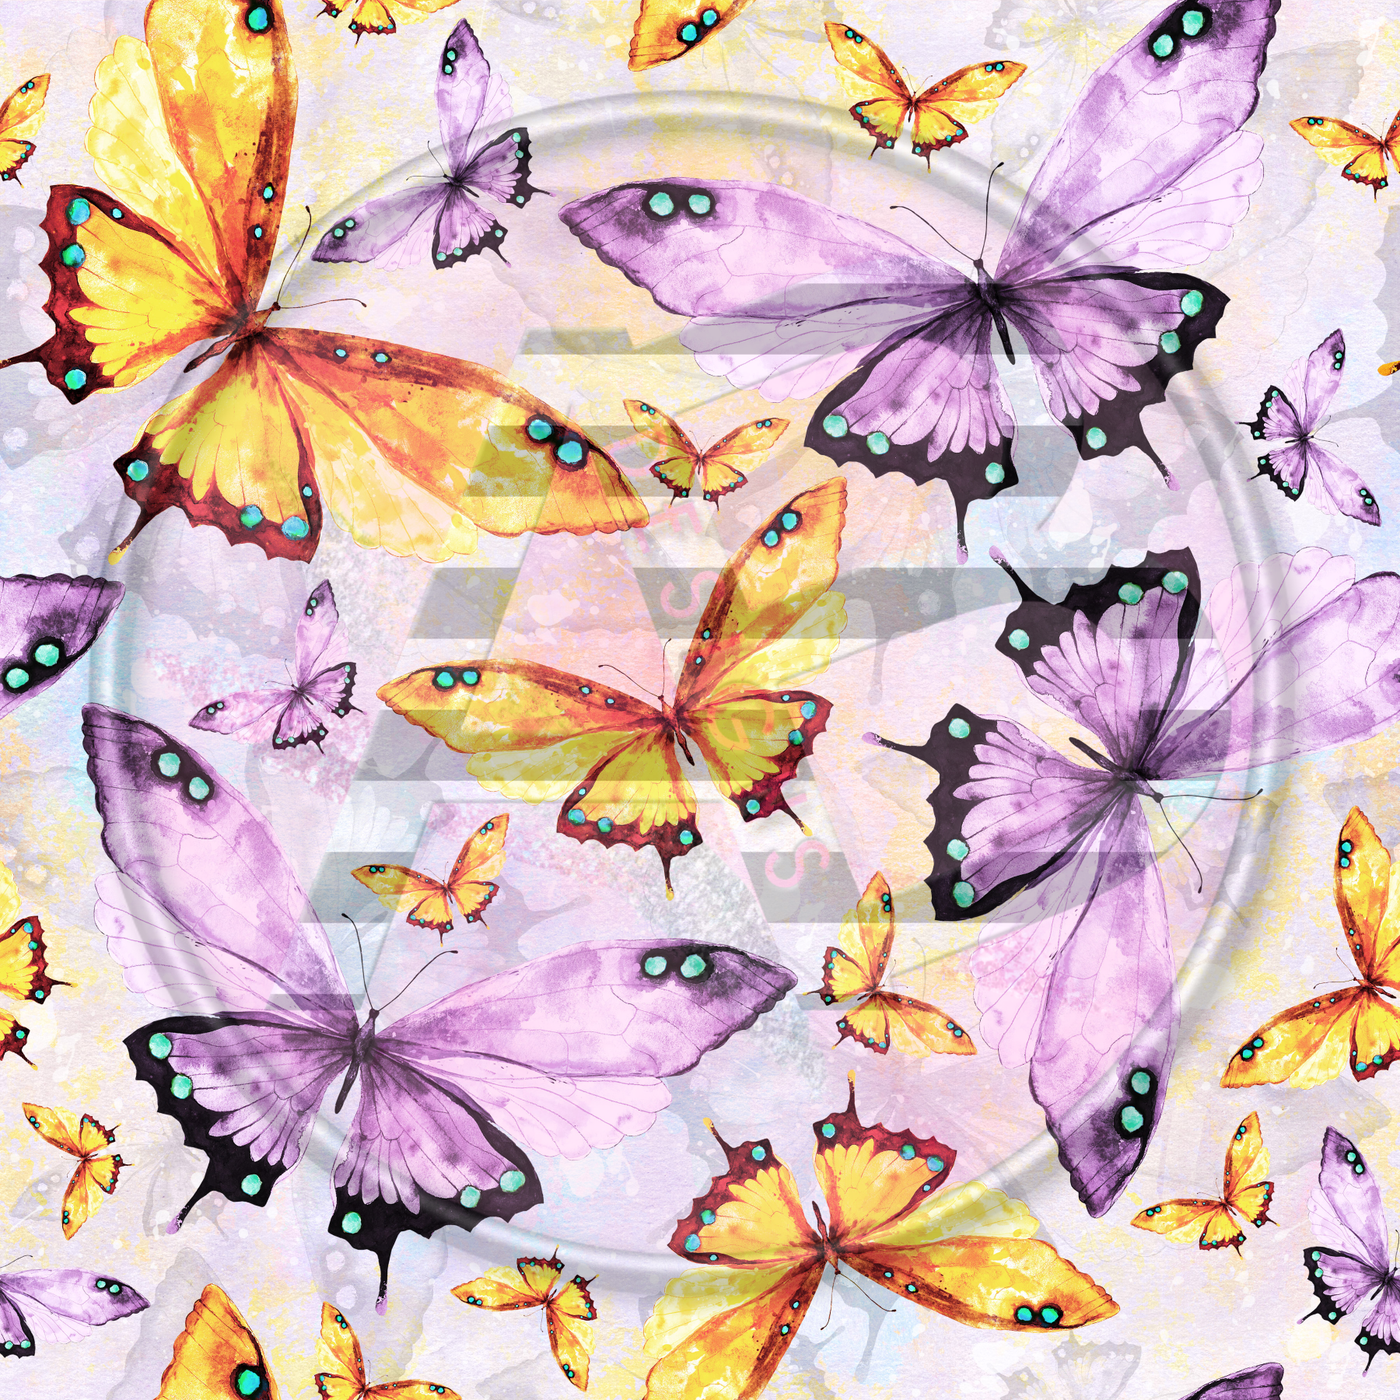 Adhesive Patterned Vinyl - Butterfly 10